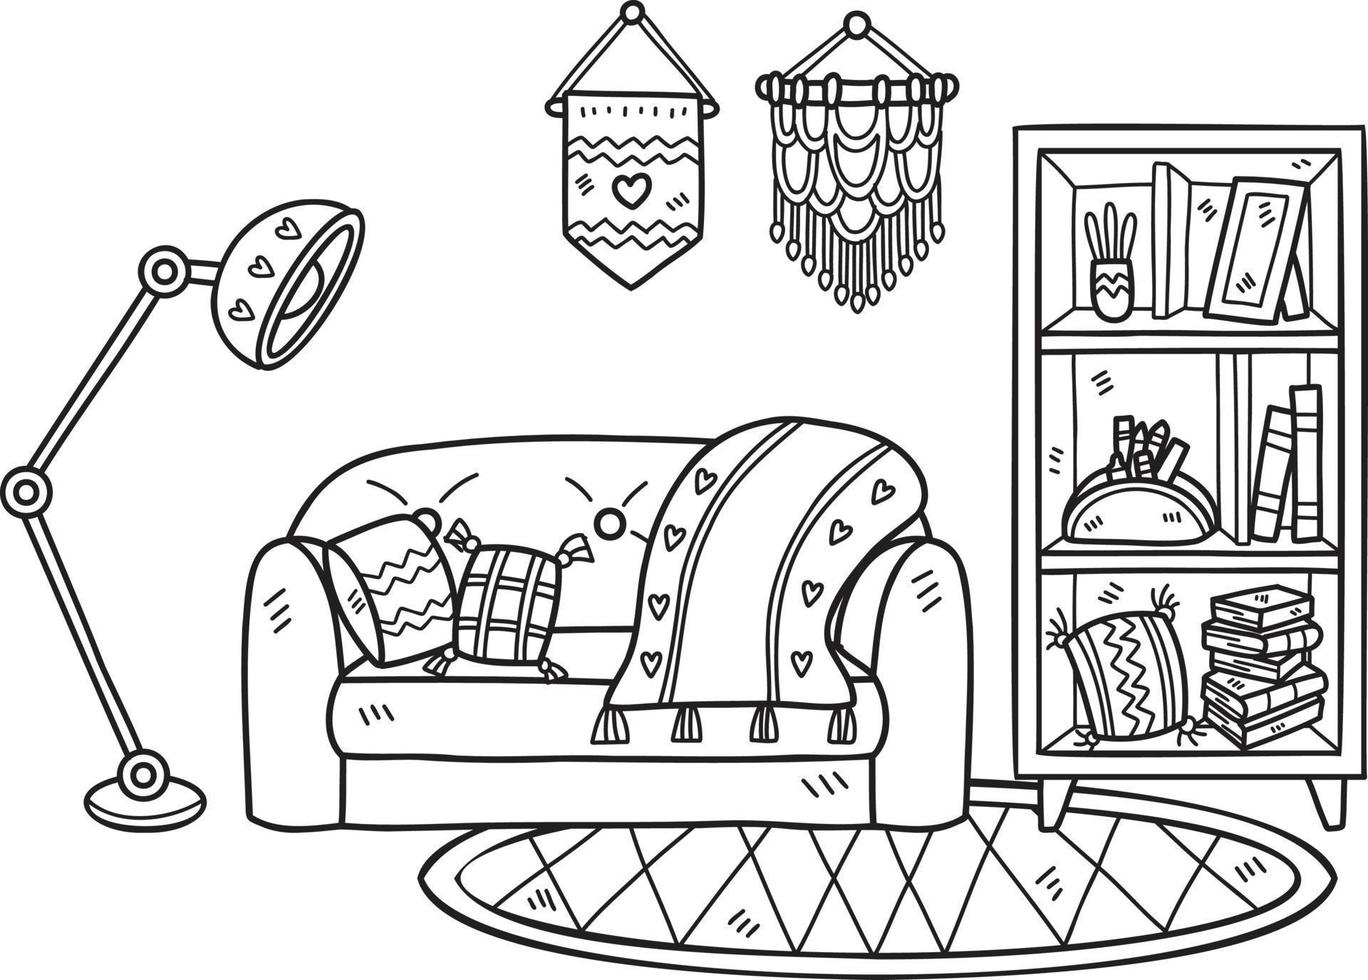 Hand Drawn couch with lamps and shelves interior room illustration vector